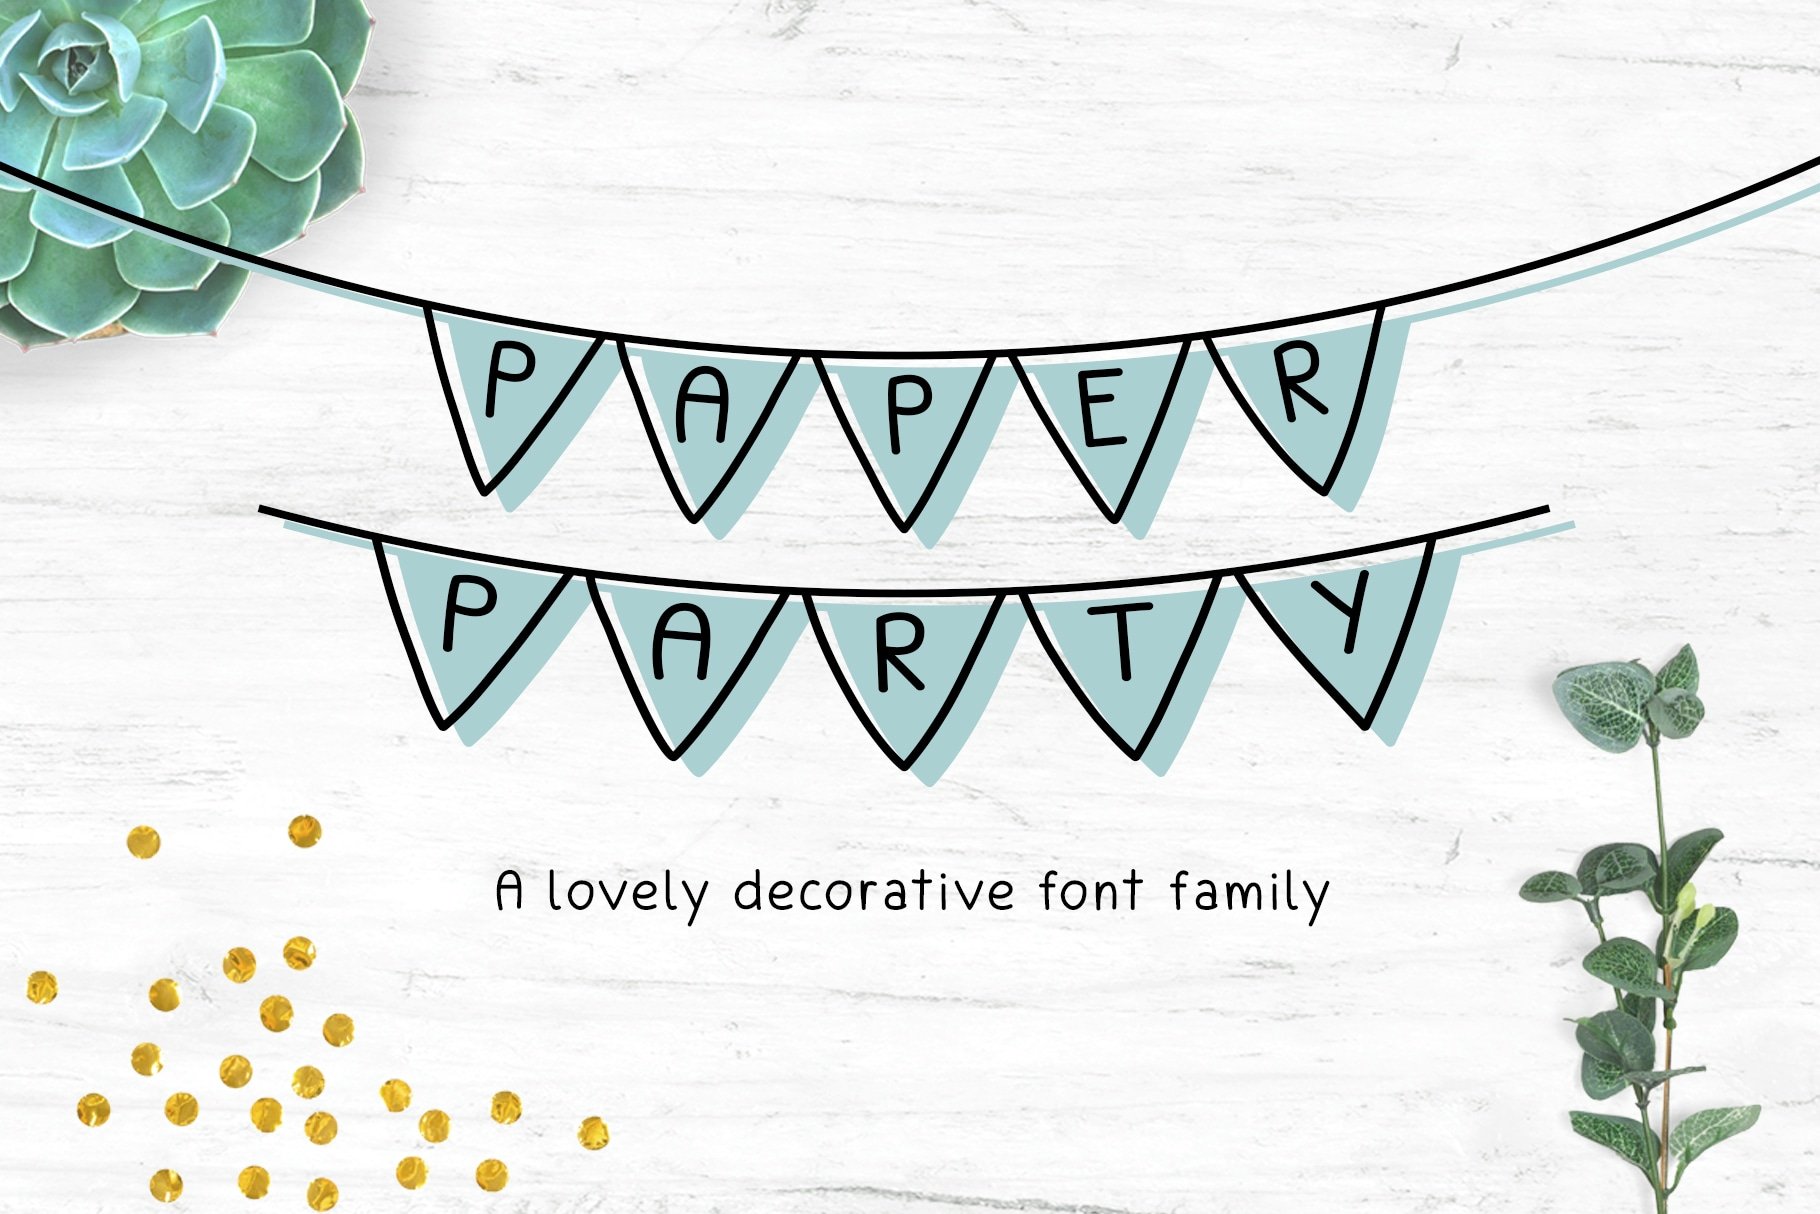 Paper Party – Font Family cover image.